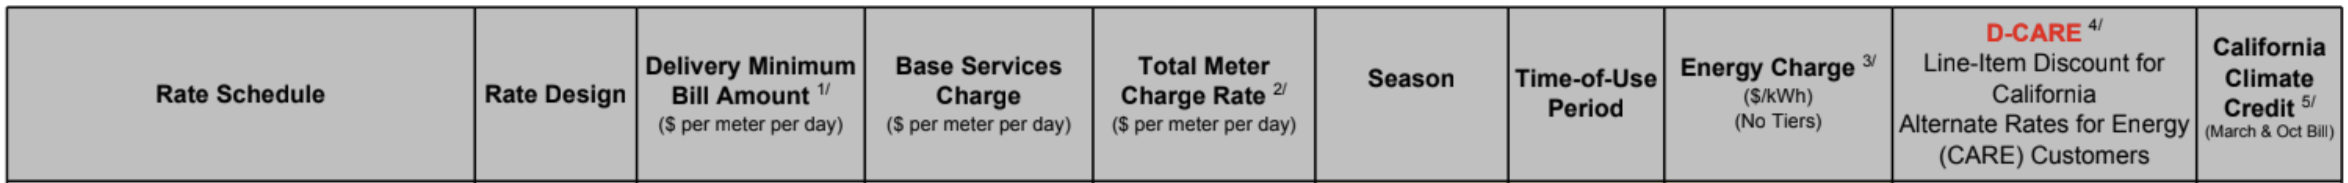 EV rate title.png